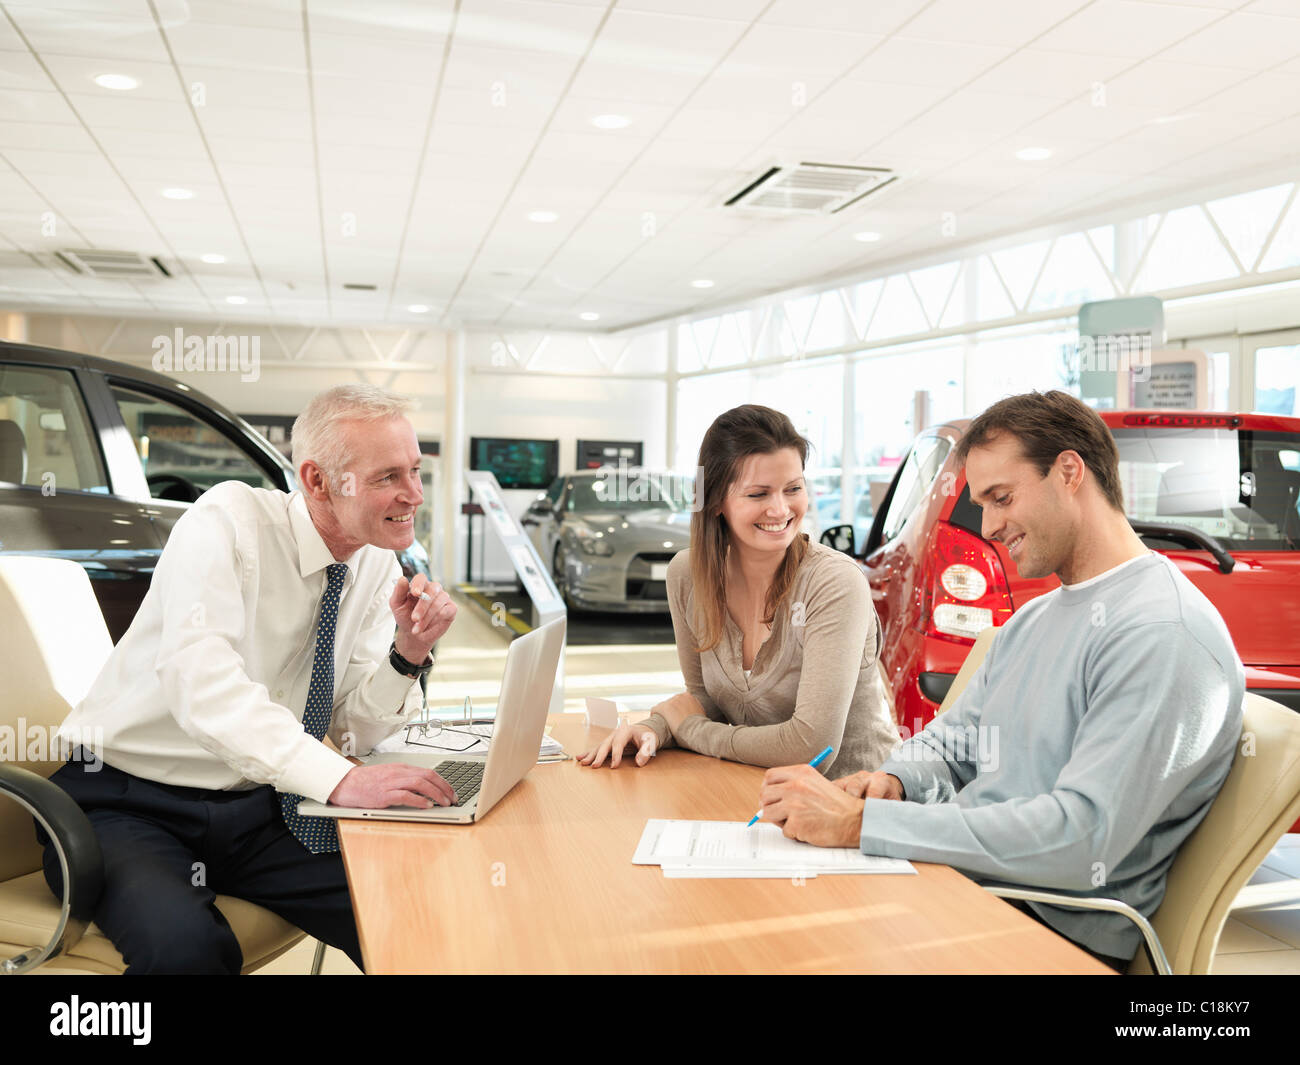 Salesman and customers in car dealership Stock Photo